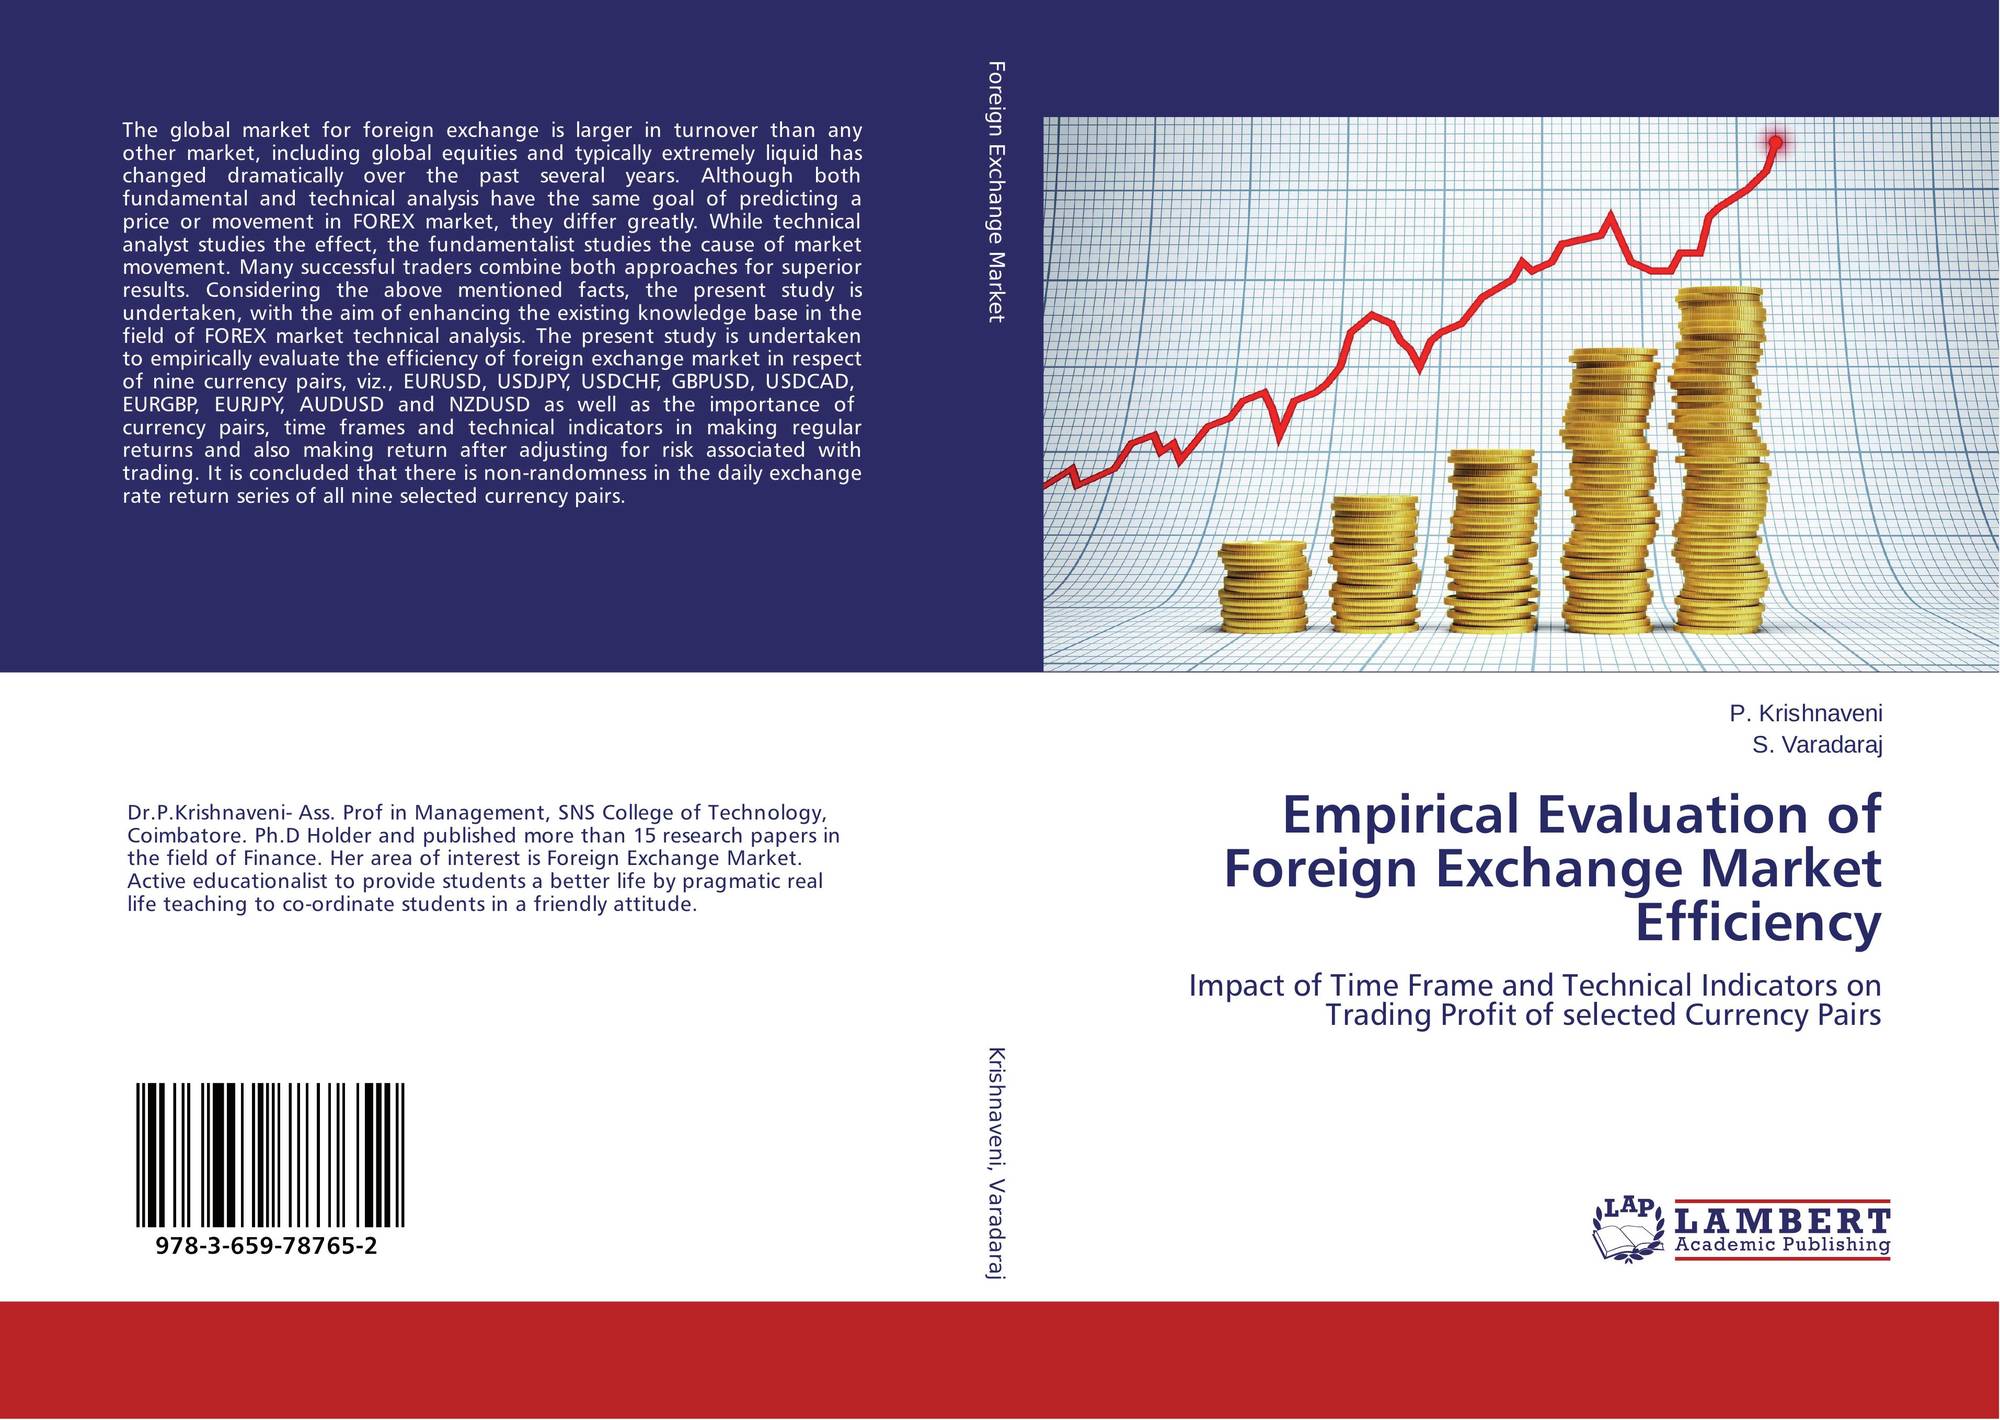 Efficiency of the foreign exchange market